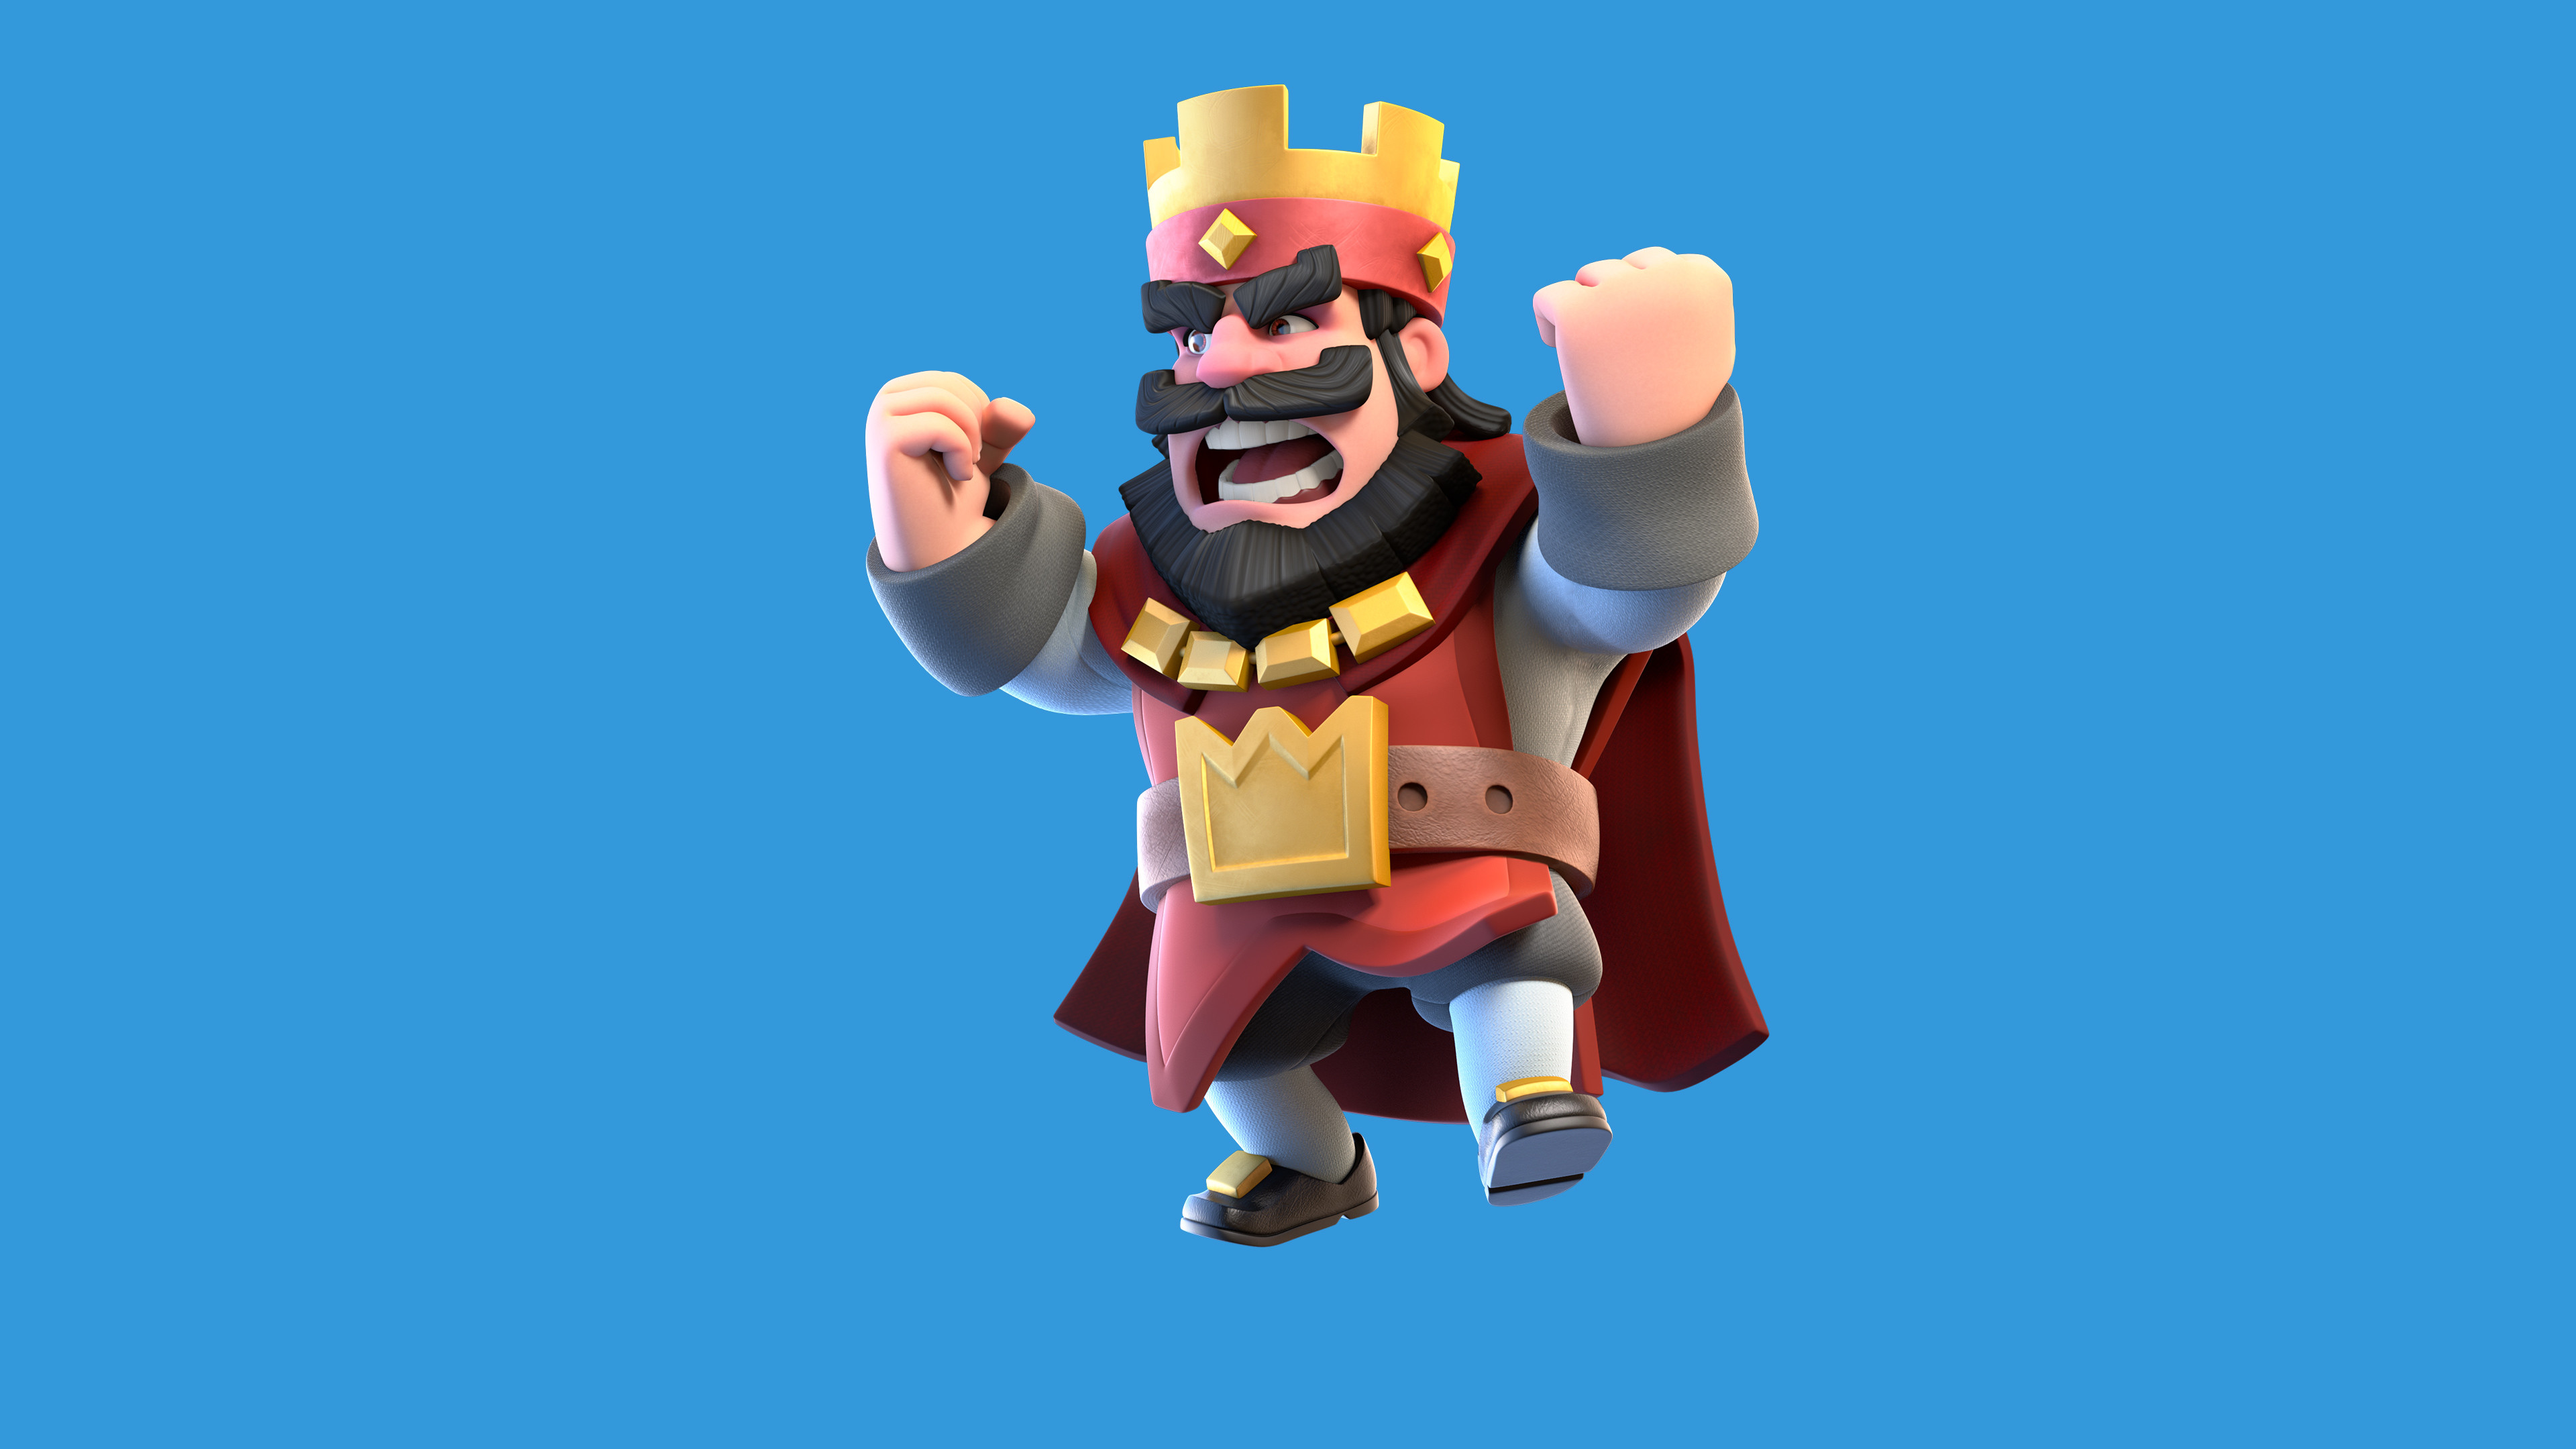 3840x2160 Clash Royale Wallpapers - Wallpaper Cave Clash Royale - YouTube ...